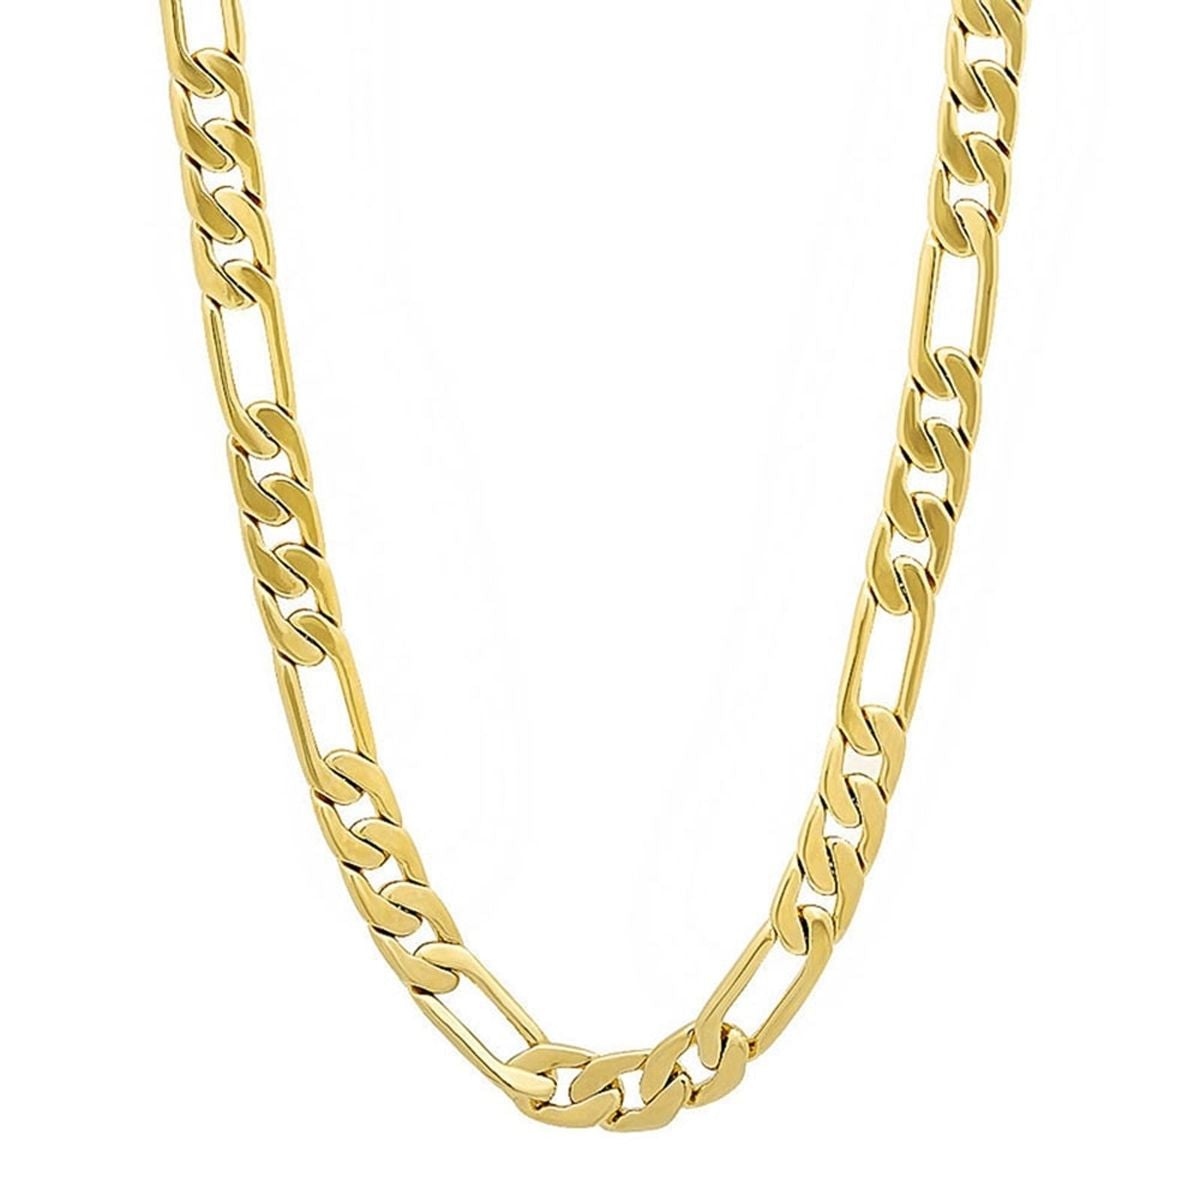 4Mm Figaro Curb 18K Gold Stainless Steel 20" Chain Necklace For Men Boys